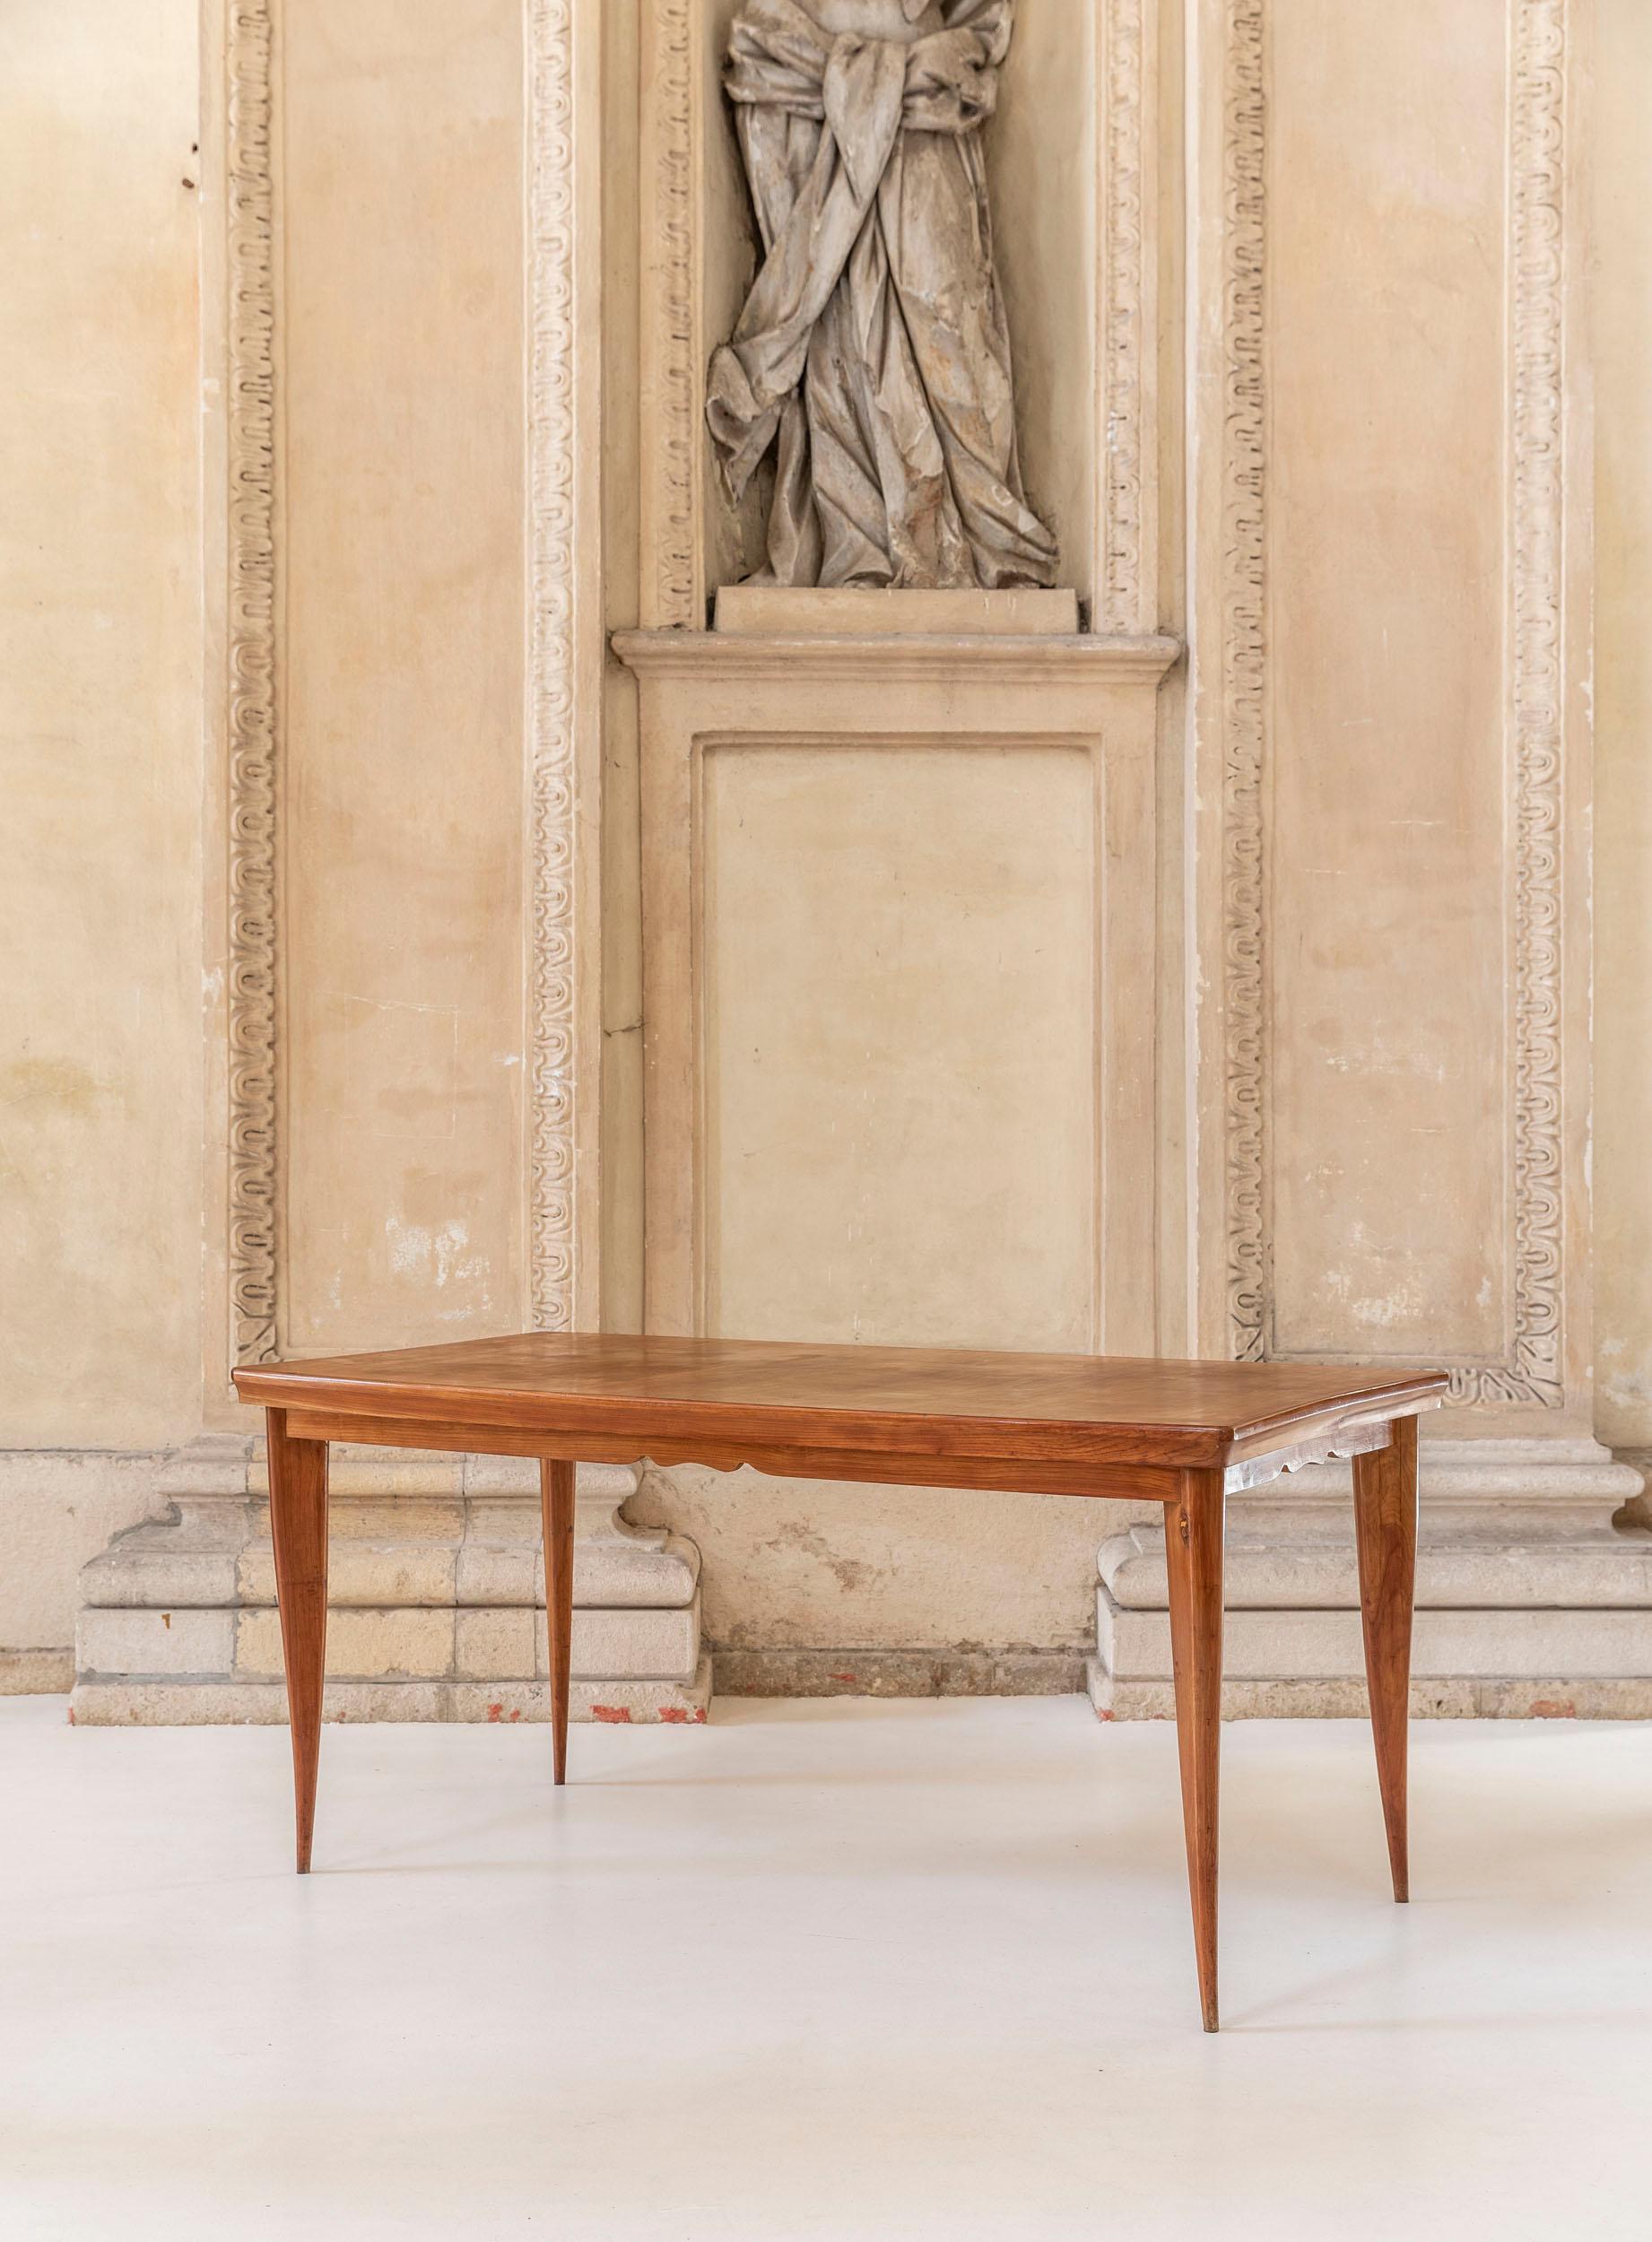 Dining table attributed to Paola Buffa in cherry wood.
The four legs are shaped and slender. The top has a concave shape along the short sides and a classy decoration motif below the slightly curve outwards long sides.
  